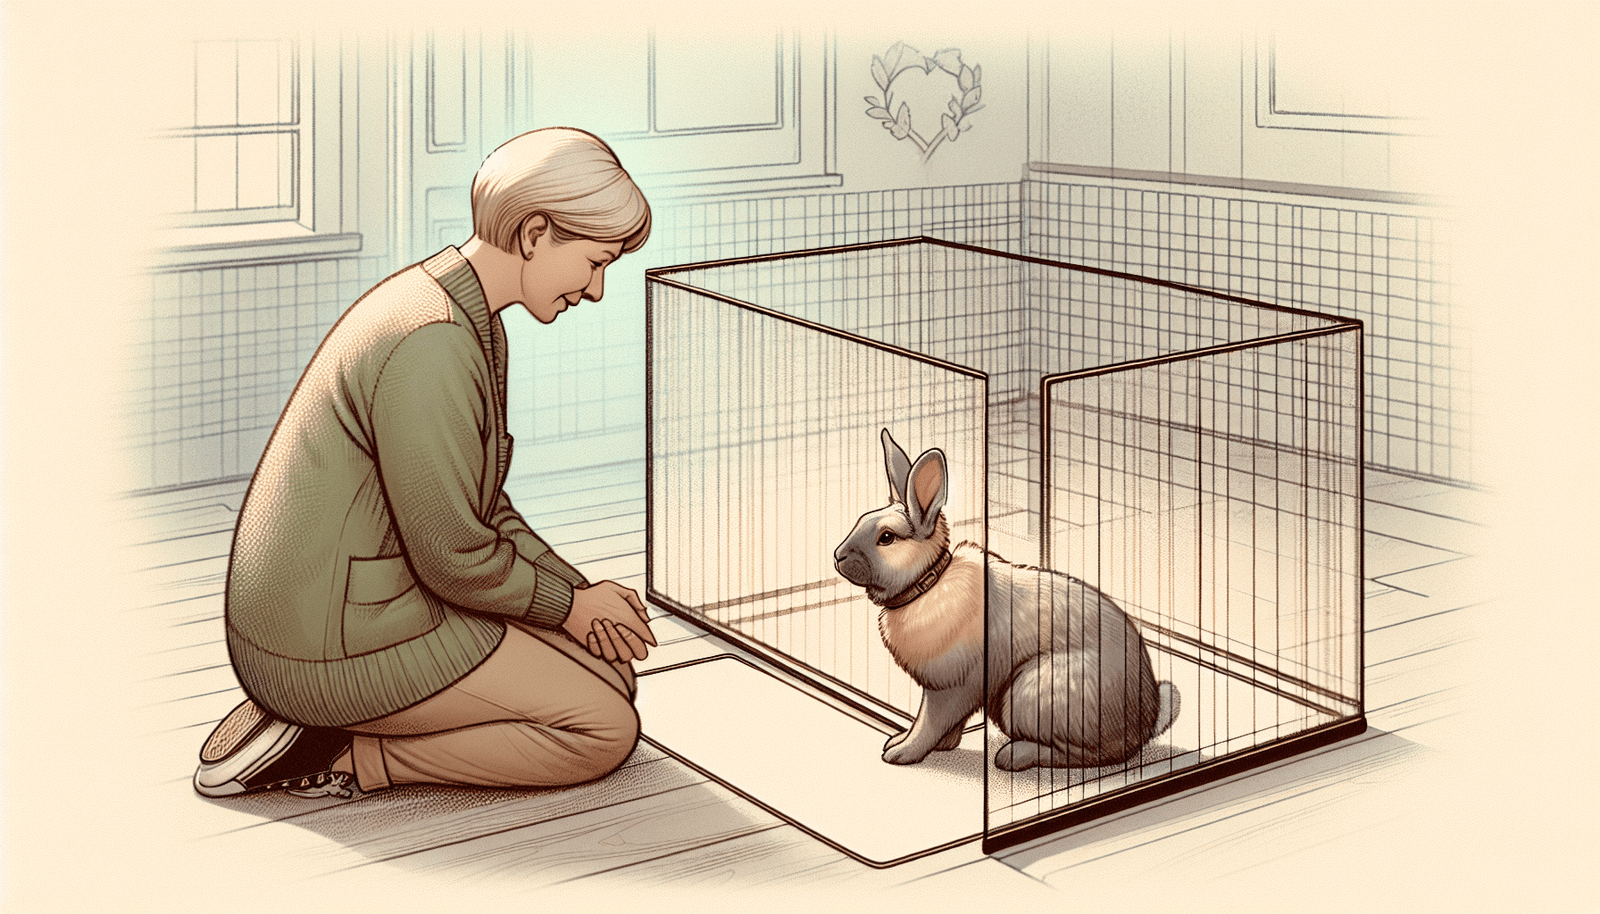 Illustration of a structured introduction between a dog and a rabbit